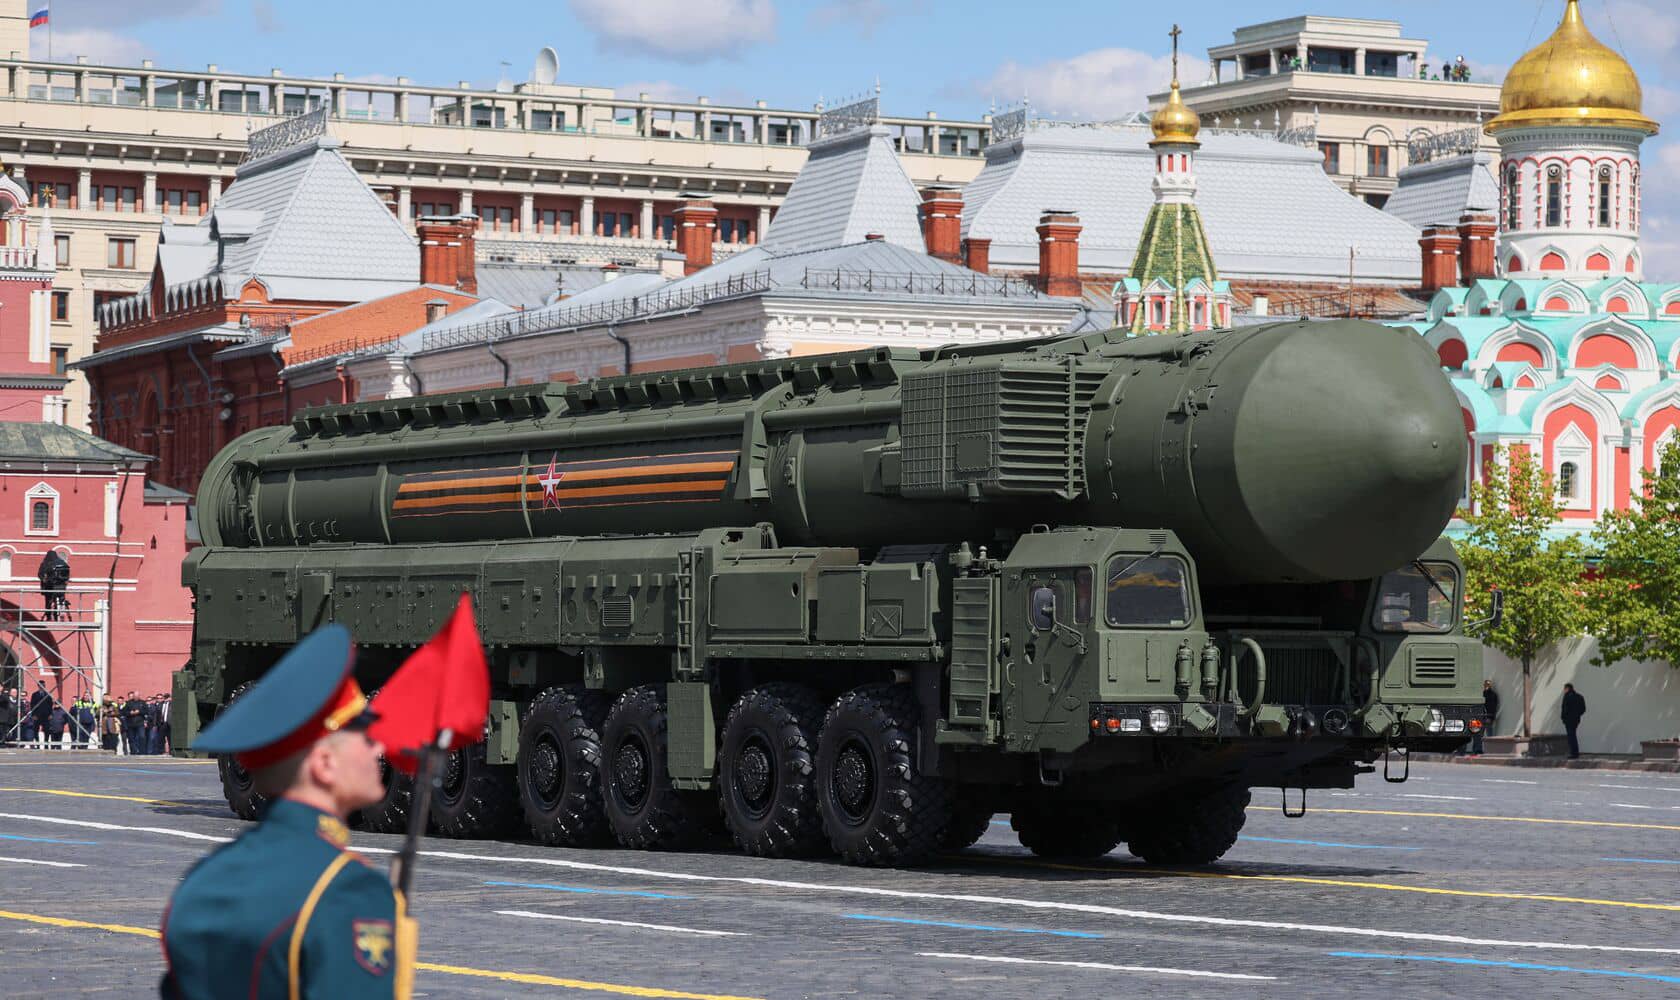 RUSSIAN YARS INTERCONTINENTAL BALLISTIC MISSILE LAUNCHER ON THE RED SQUARE. PHOTO BY GETTY IMAGES